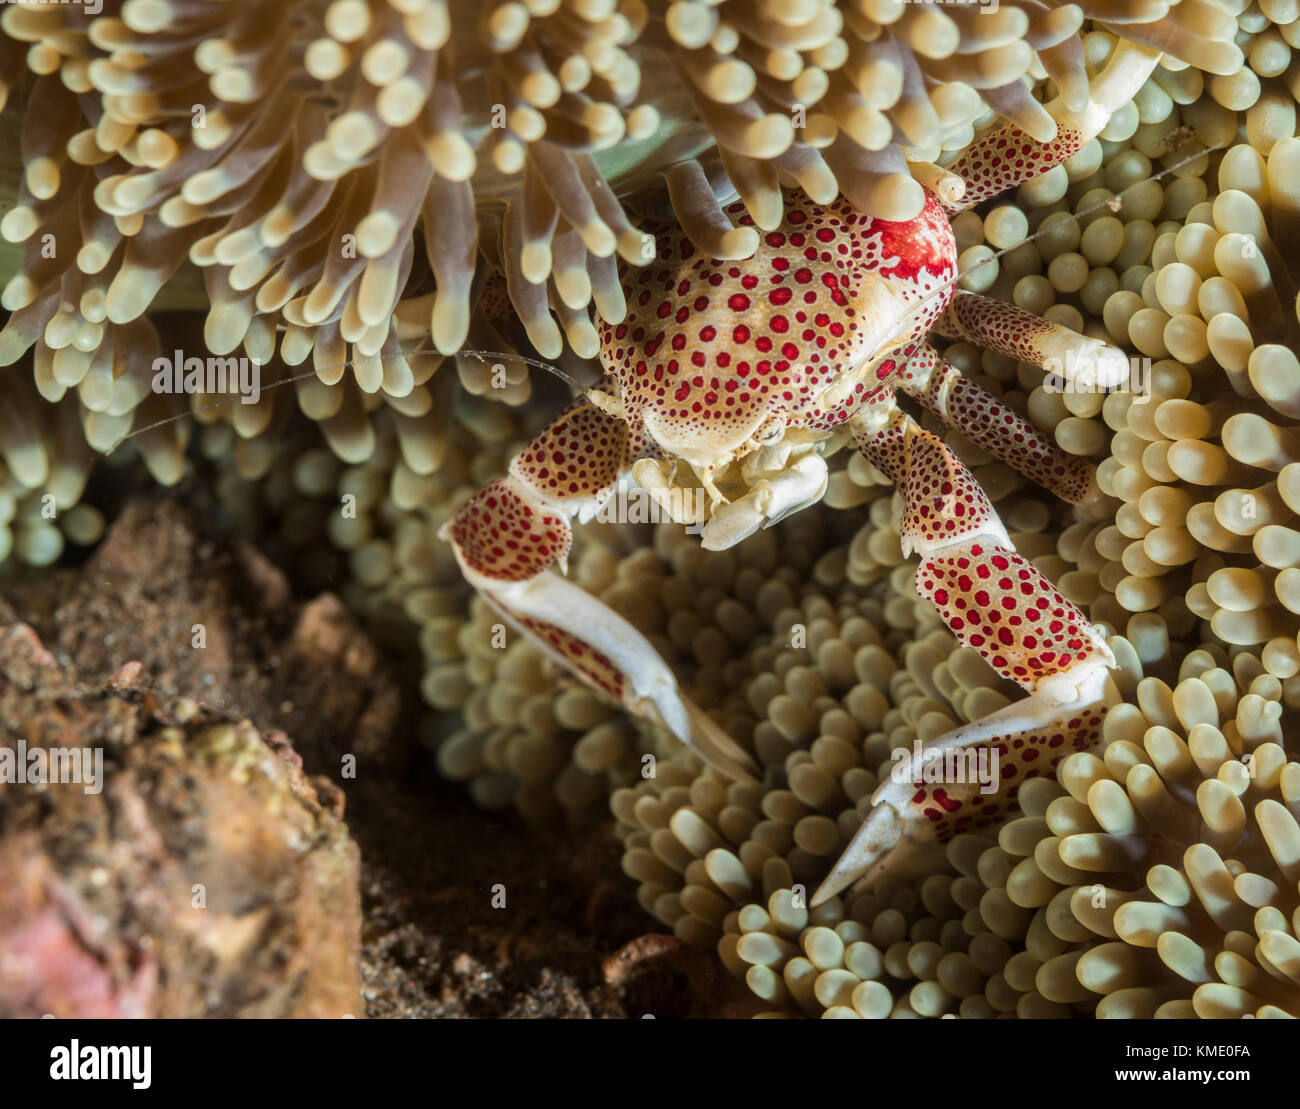 Porcelain crab in a carpet anemone Stock Photo